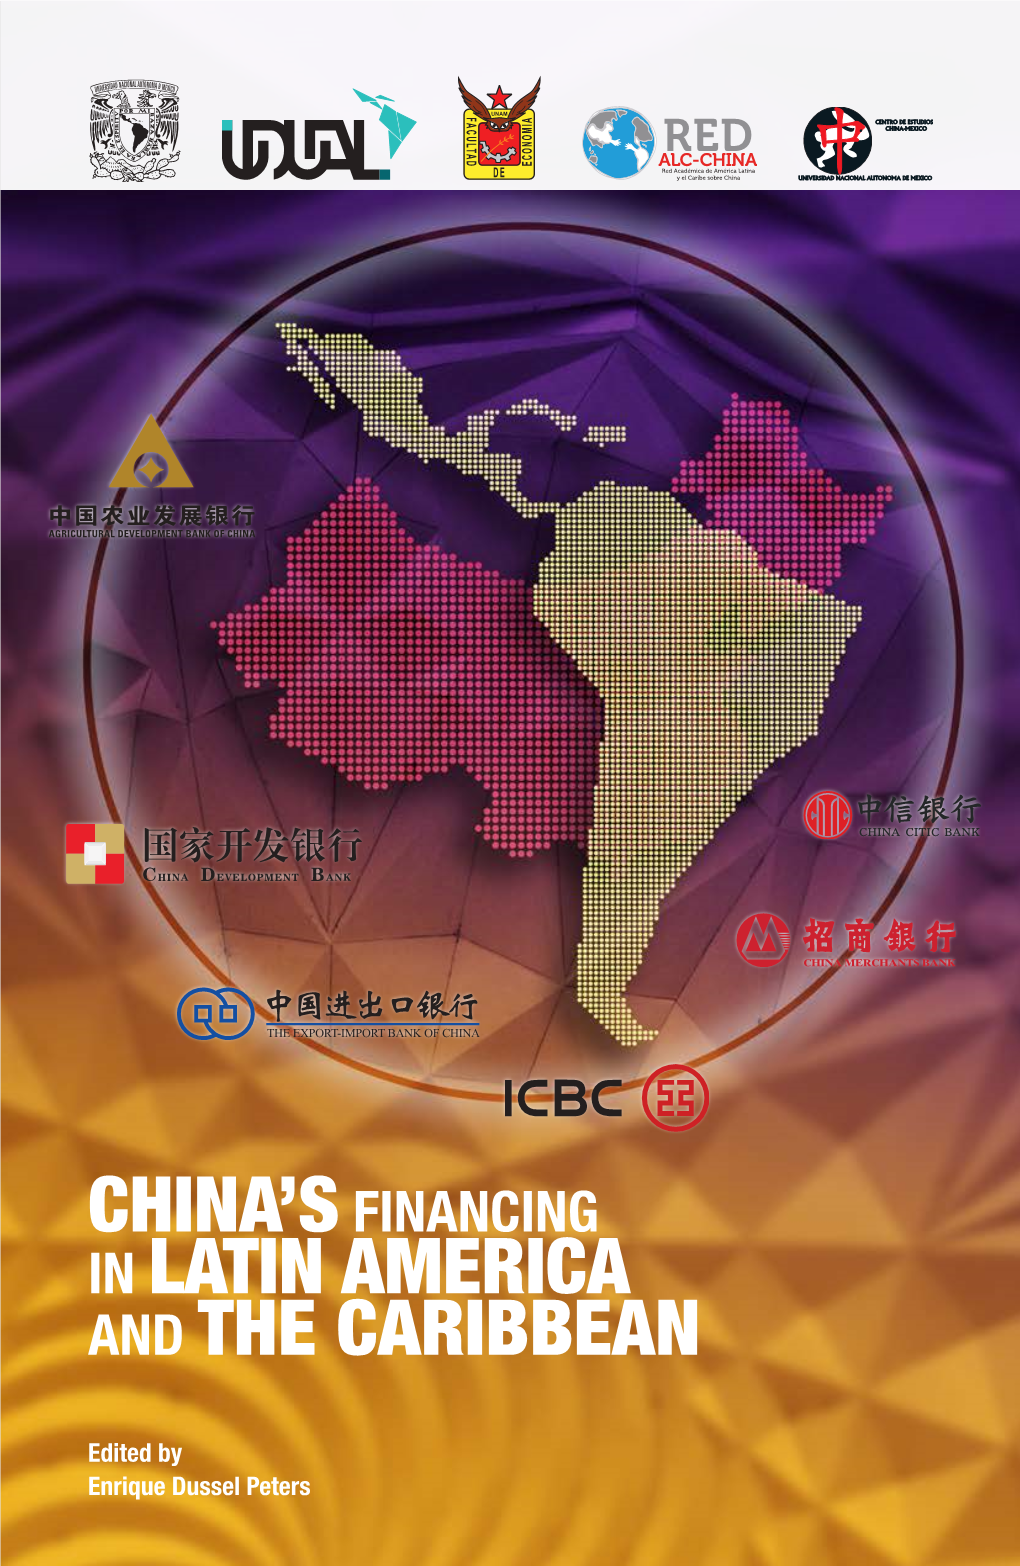 China's Financing in Latin America and the Caribbean